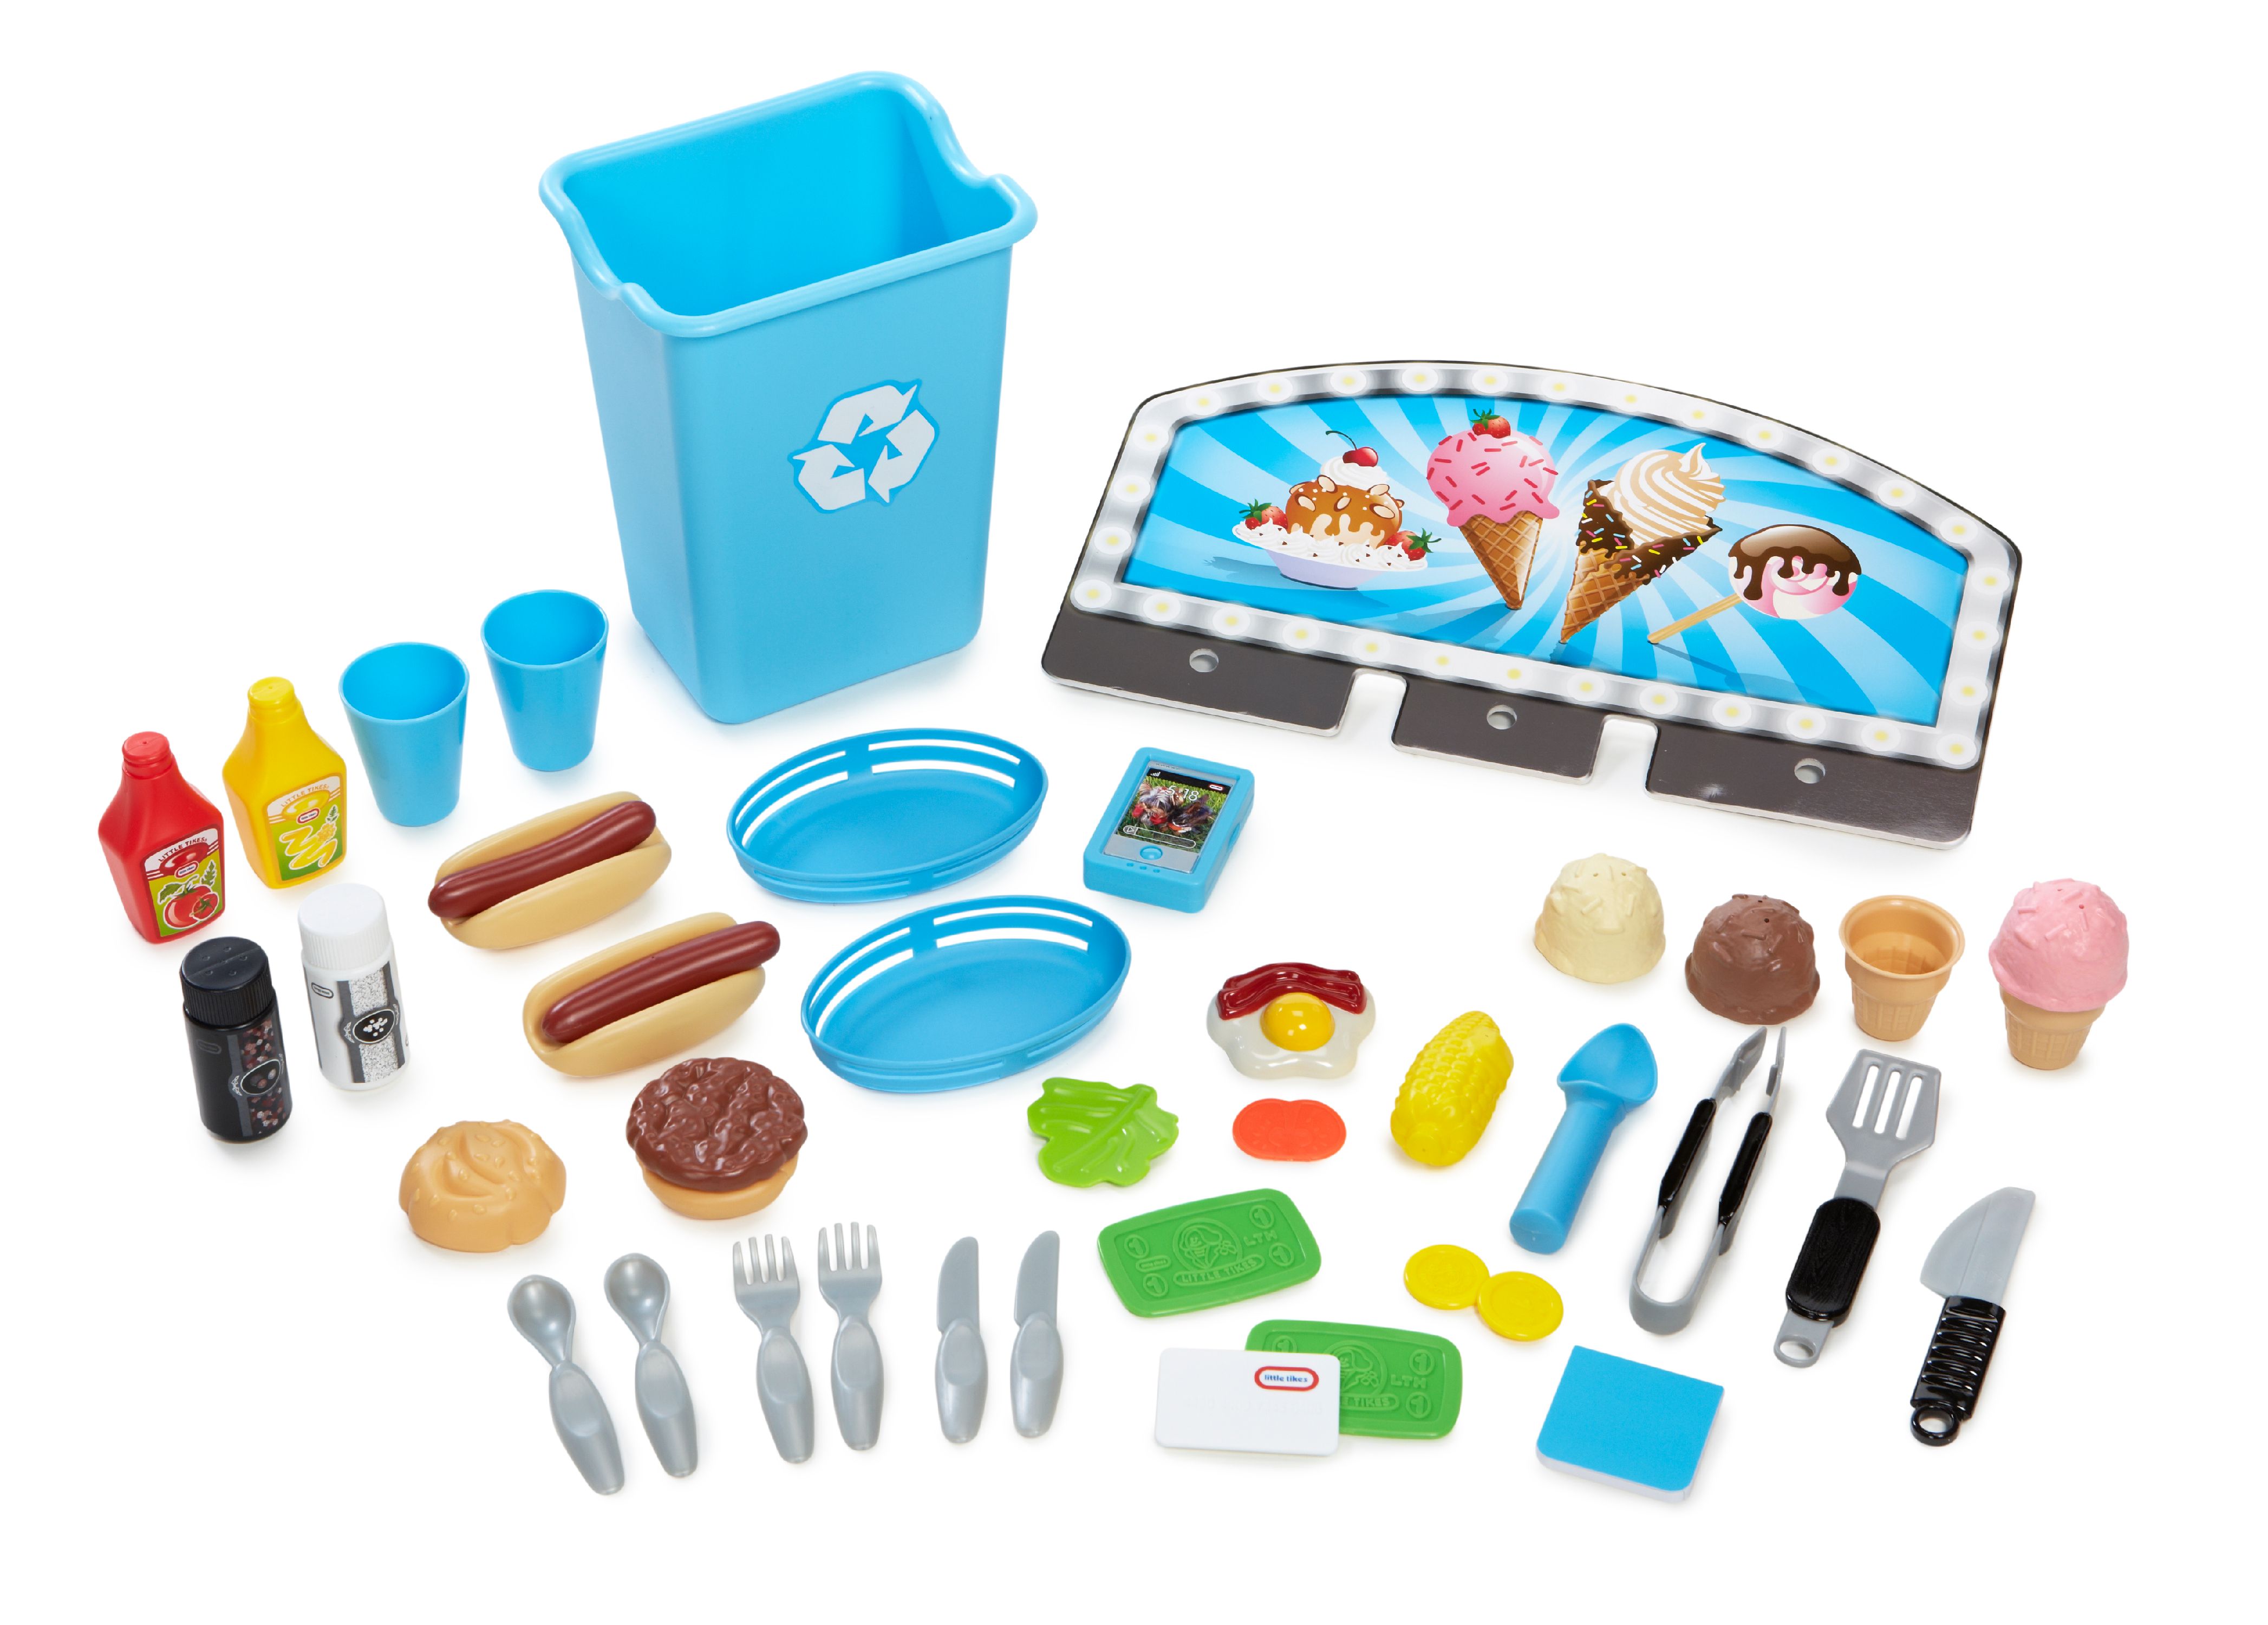 Little Tikes 2-in-1 Truck Play Food with 40+ Piece Accessory Set - image 4 of 9